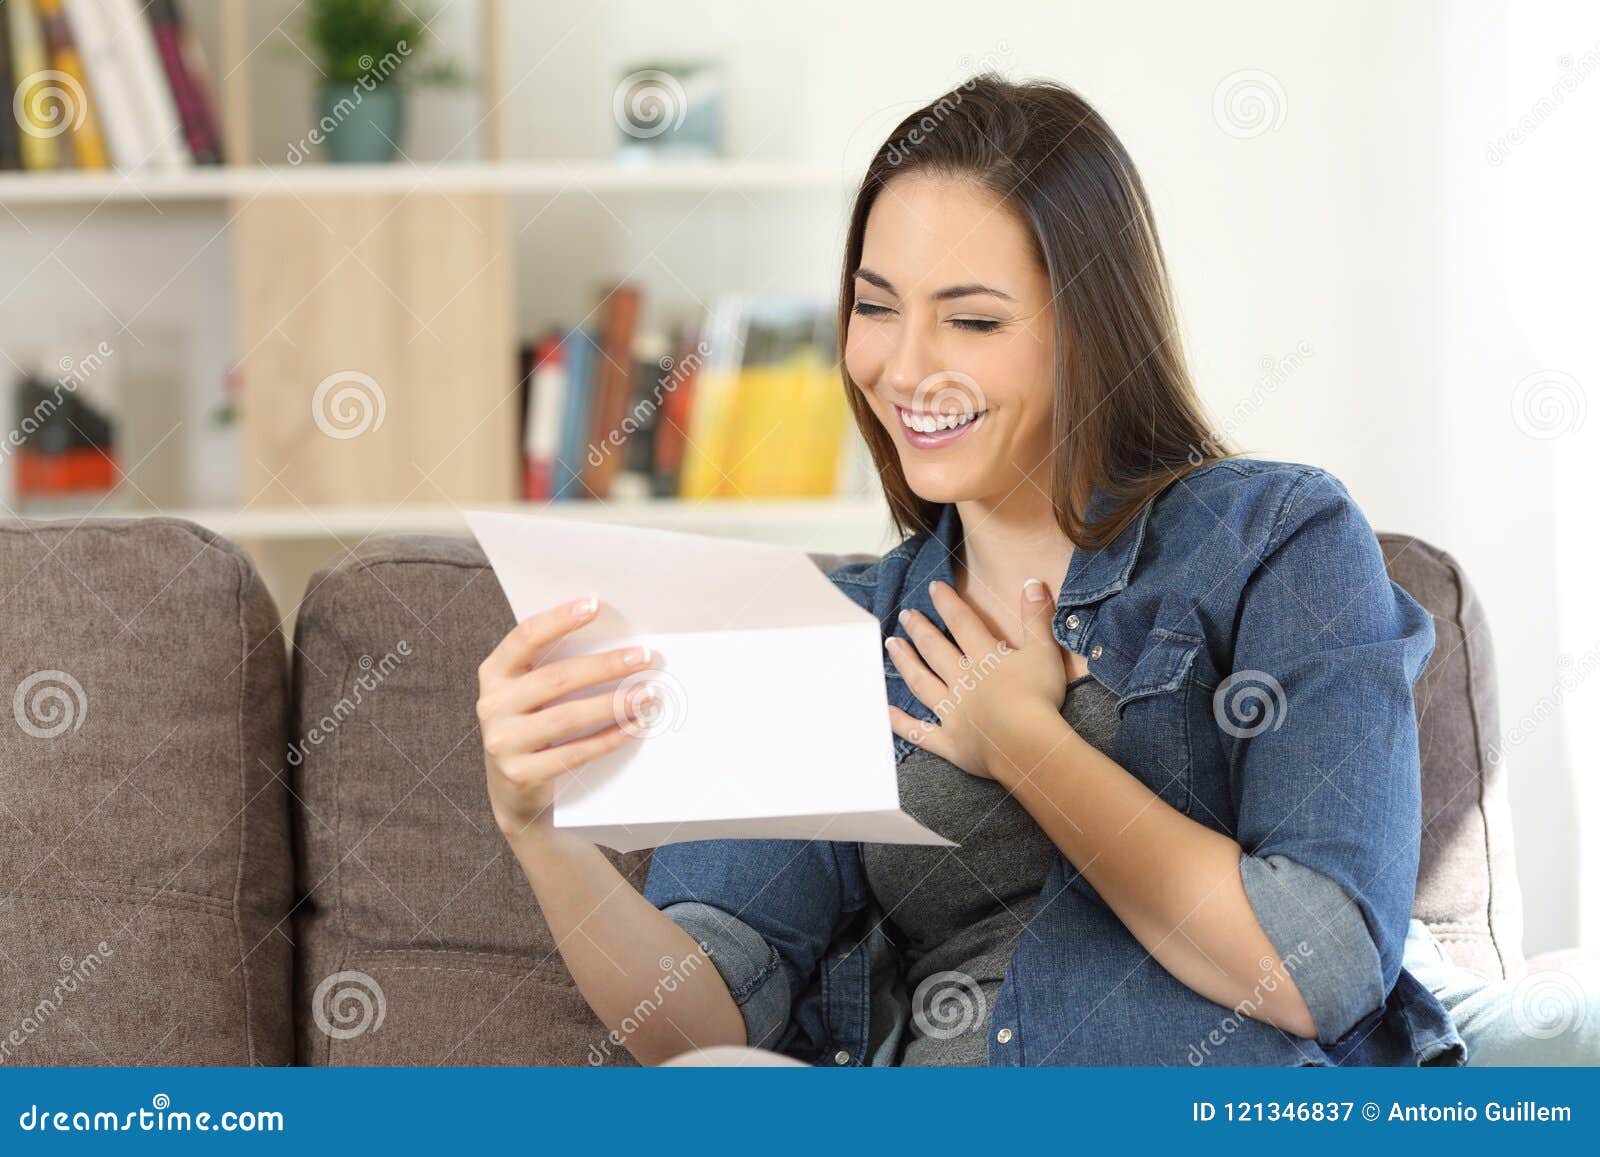 candid woman reading hopeful news in a letter